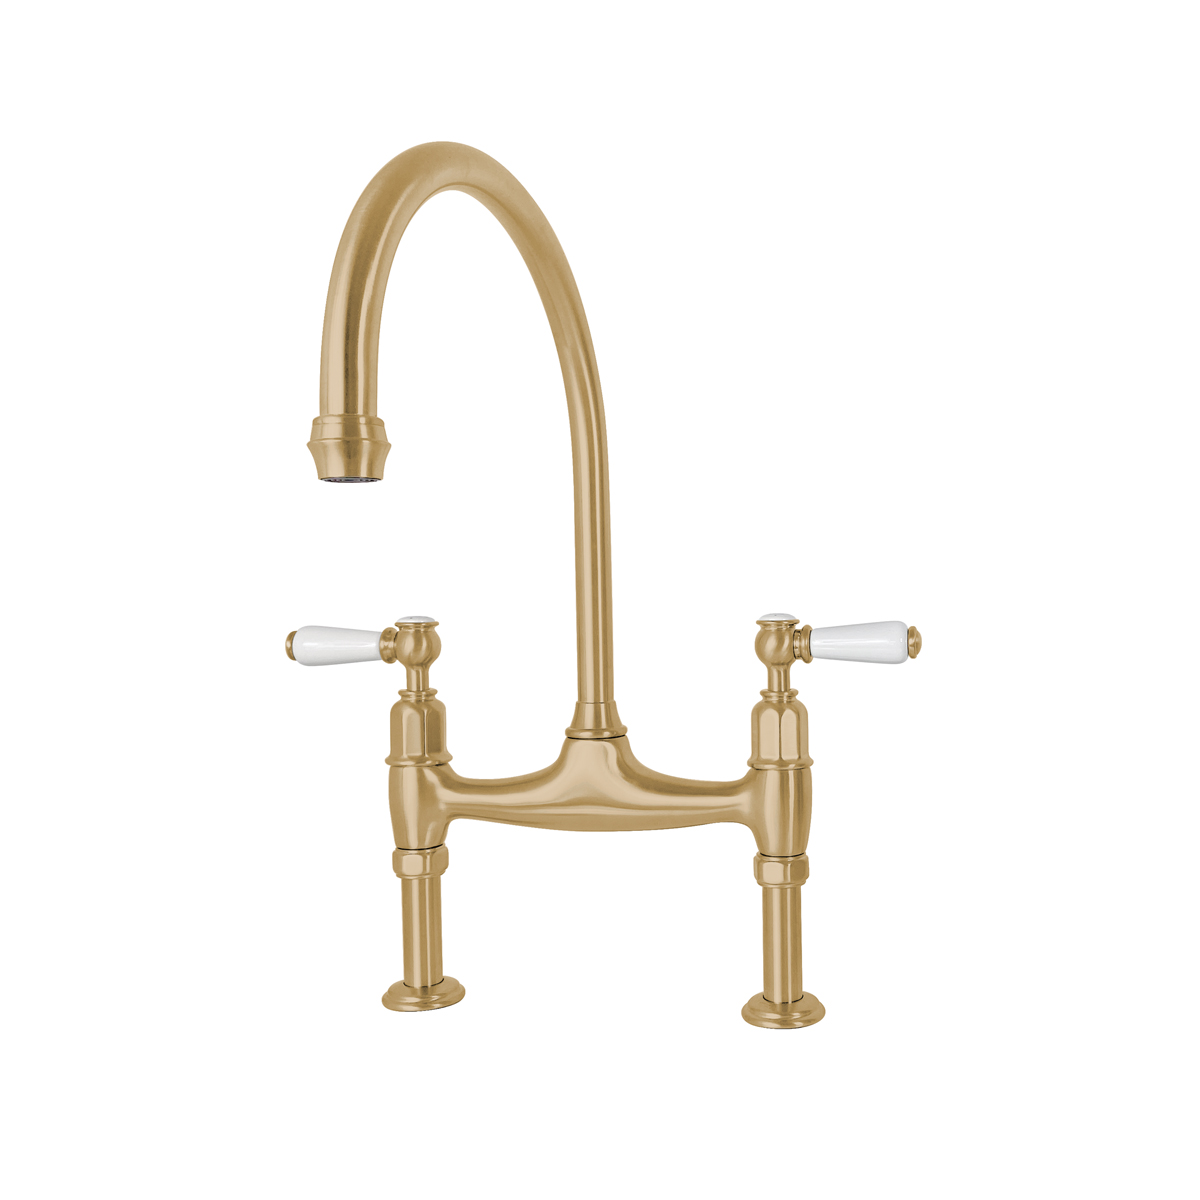 Shaws by Perrin & Rowe Pendleton bridge mixer in satin brass. Ionian style kitchen tap with straight unions AUSH.4193. Distributed in Australia by Luxe by Design, Brisbane.